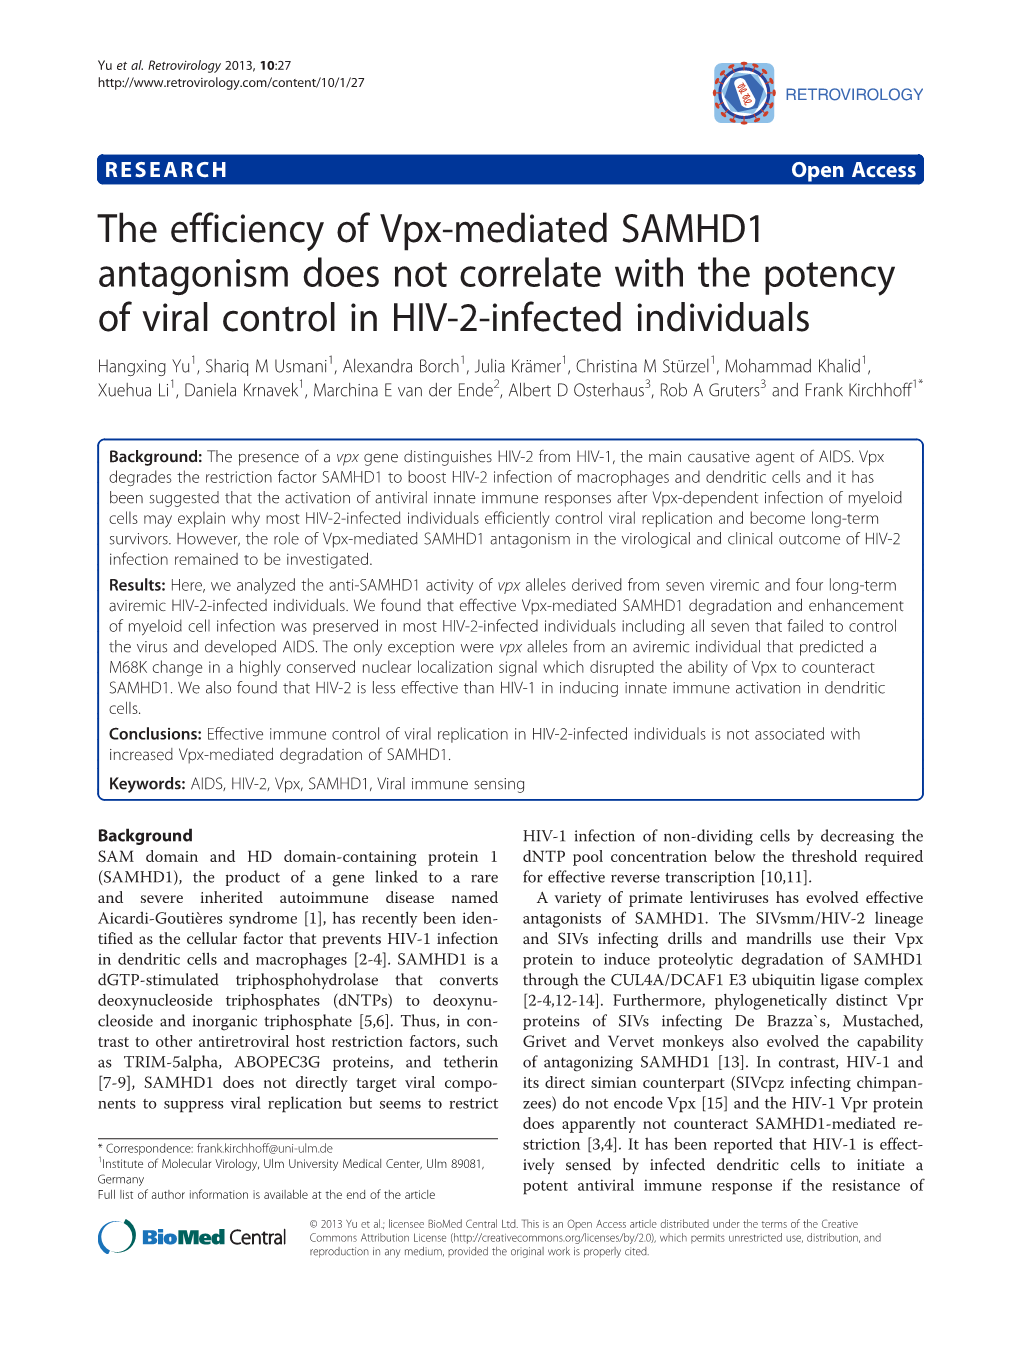 The Efficiency of Vpx-Mediated SAMHD1 Antagonism Does Not